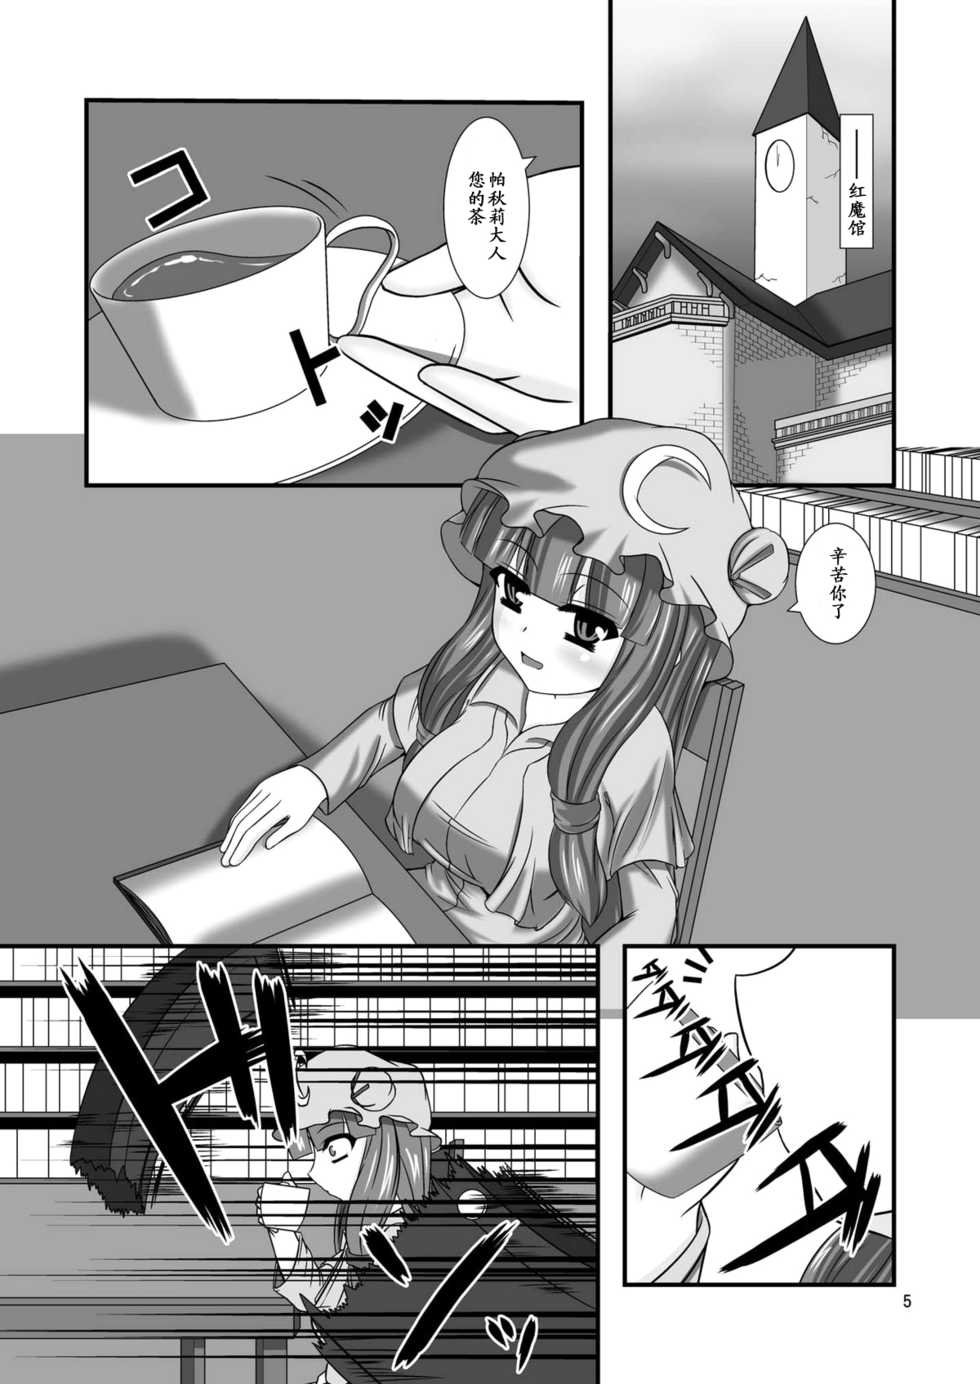 (C79) [Endless Requiem (yasha)] Touhou Do M Hoihoi ~Flandre Hen~ (Touhou Project) [Chinese] [黑条汉化] - Page 5